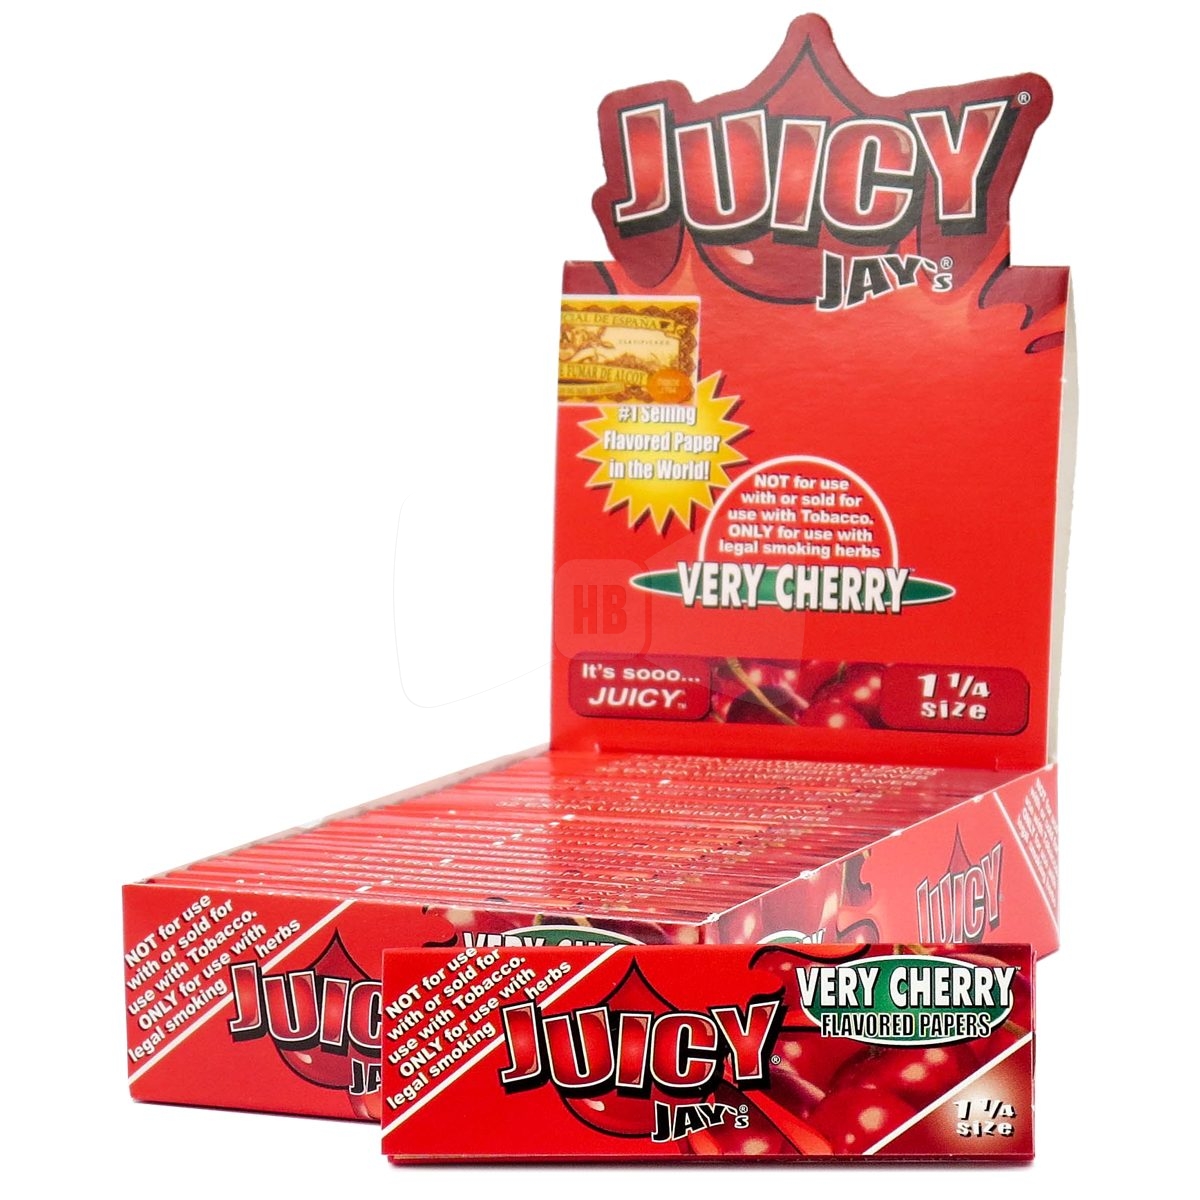 Juicy Jays Very Cherry Rolling Papers Full Box (24 packs) King Size